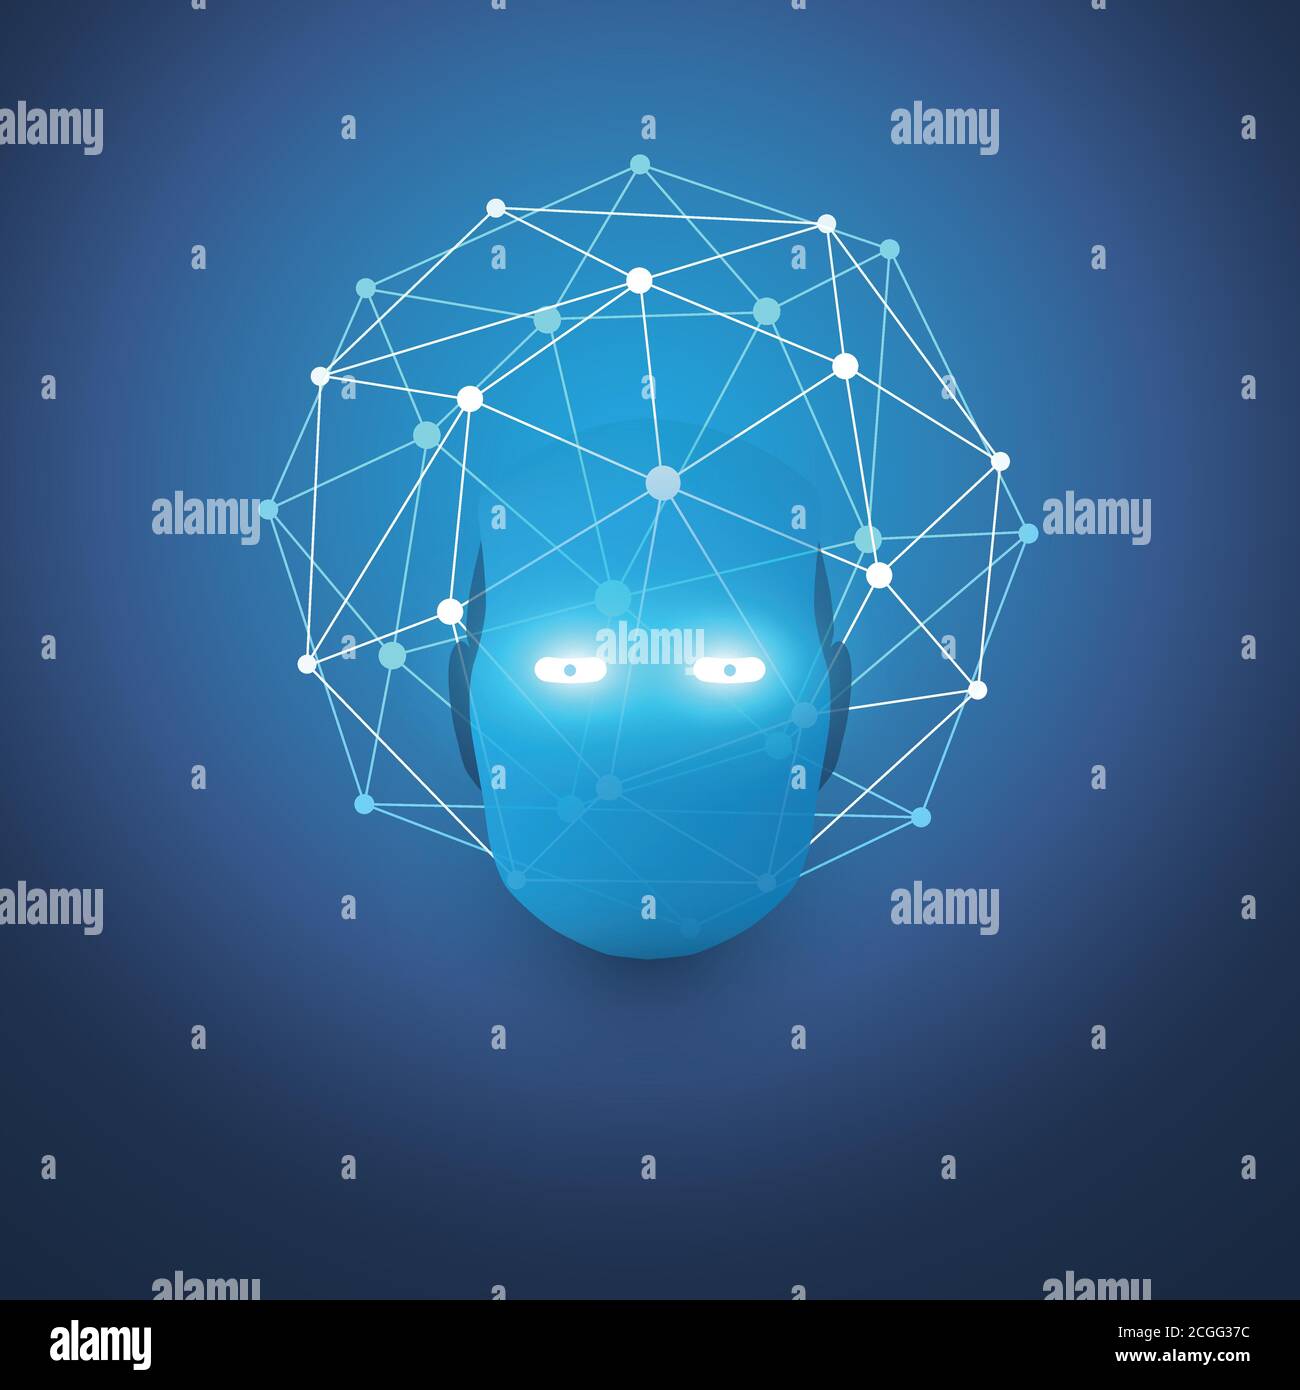 Abstract Modern Style Blue Machine Learning, Artificial Intelligence and Neural Networks Design Concept with Polygonal Sphere, 3D Network Mesh and Rob Stock Vector